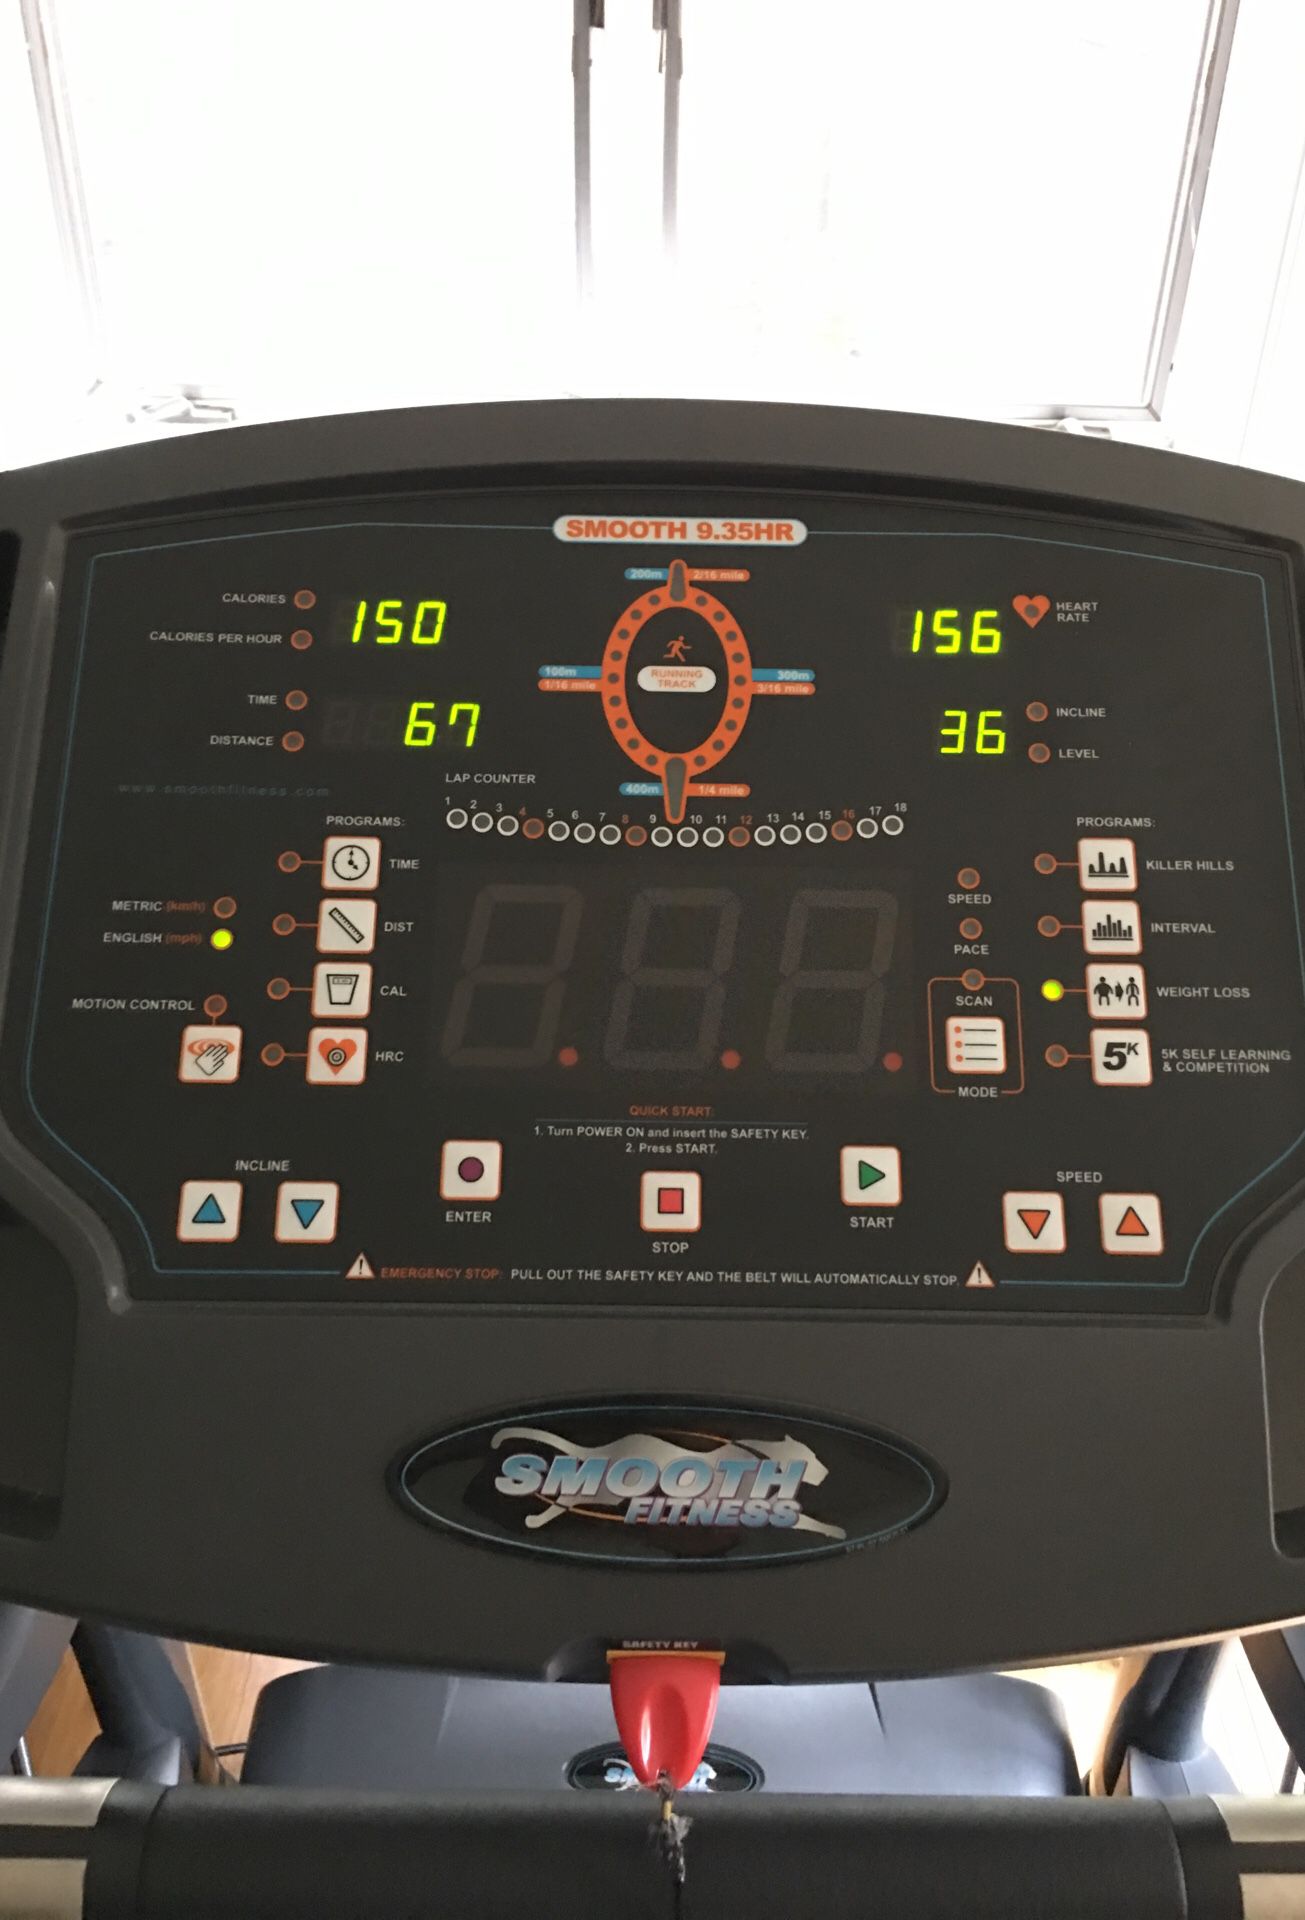 Treadmill by Smooth Fitness